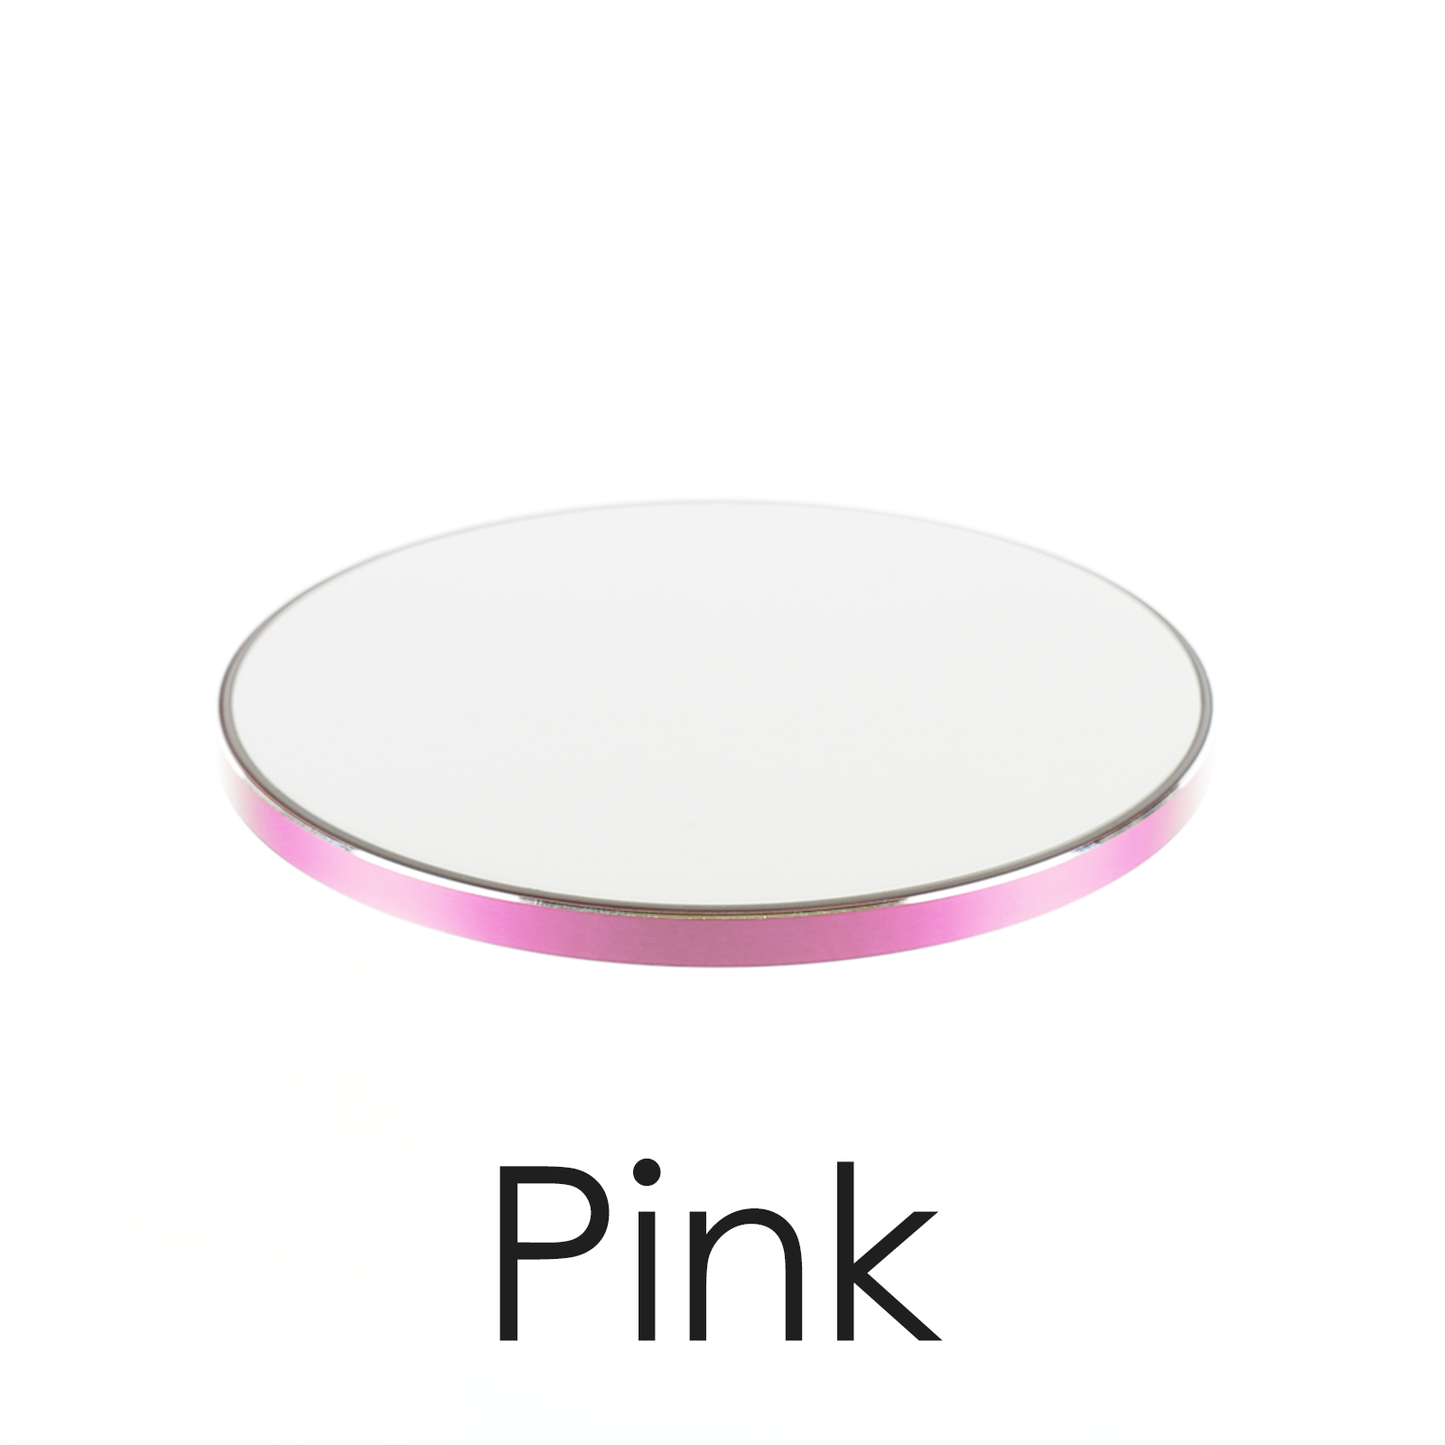 Personalised Wireless Charger with White Monogram and Pinstripe on Pink